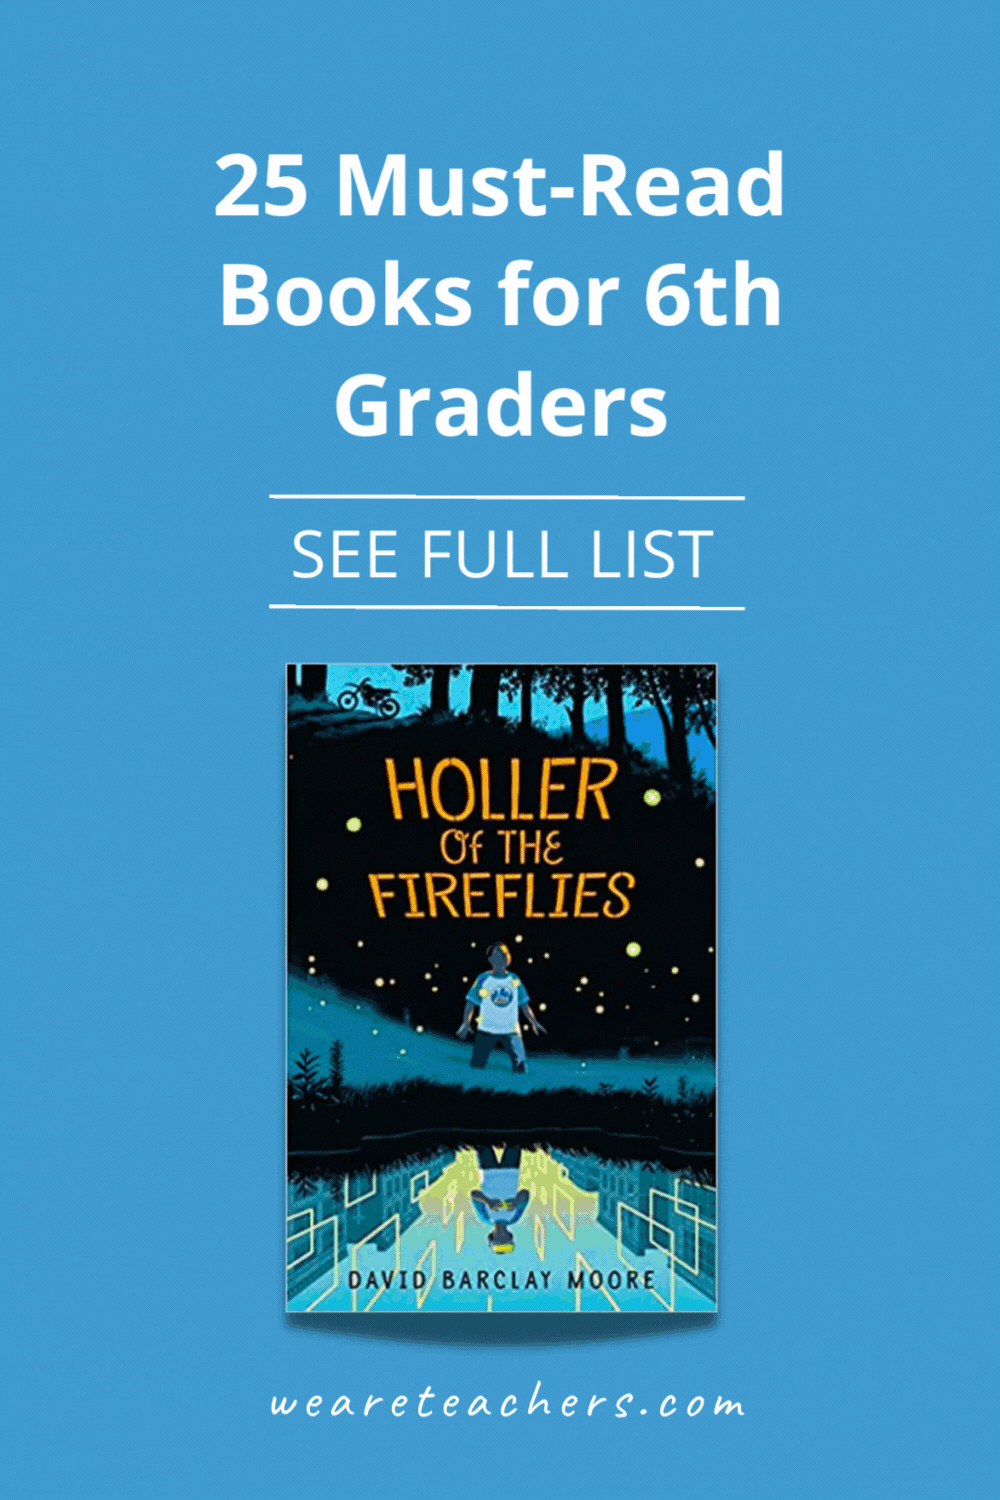 Add some amazing new books to your library with this list of new books for 6th graders. We've got something for every reader!